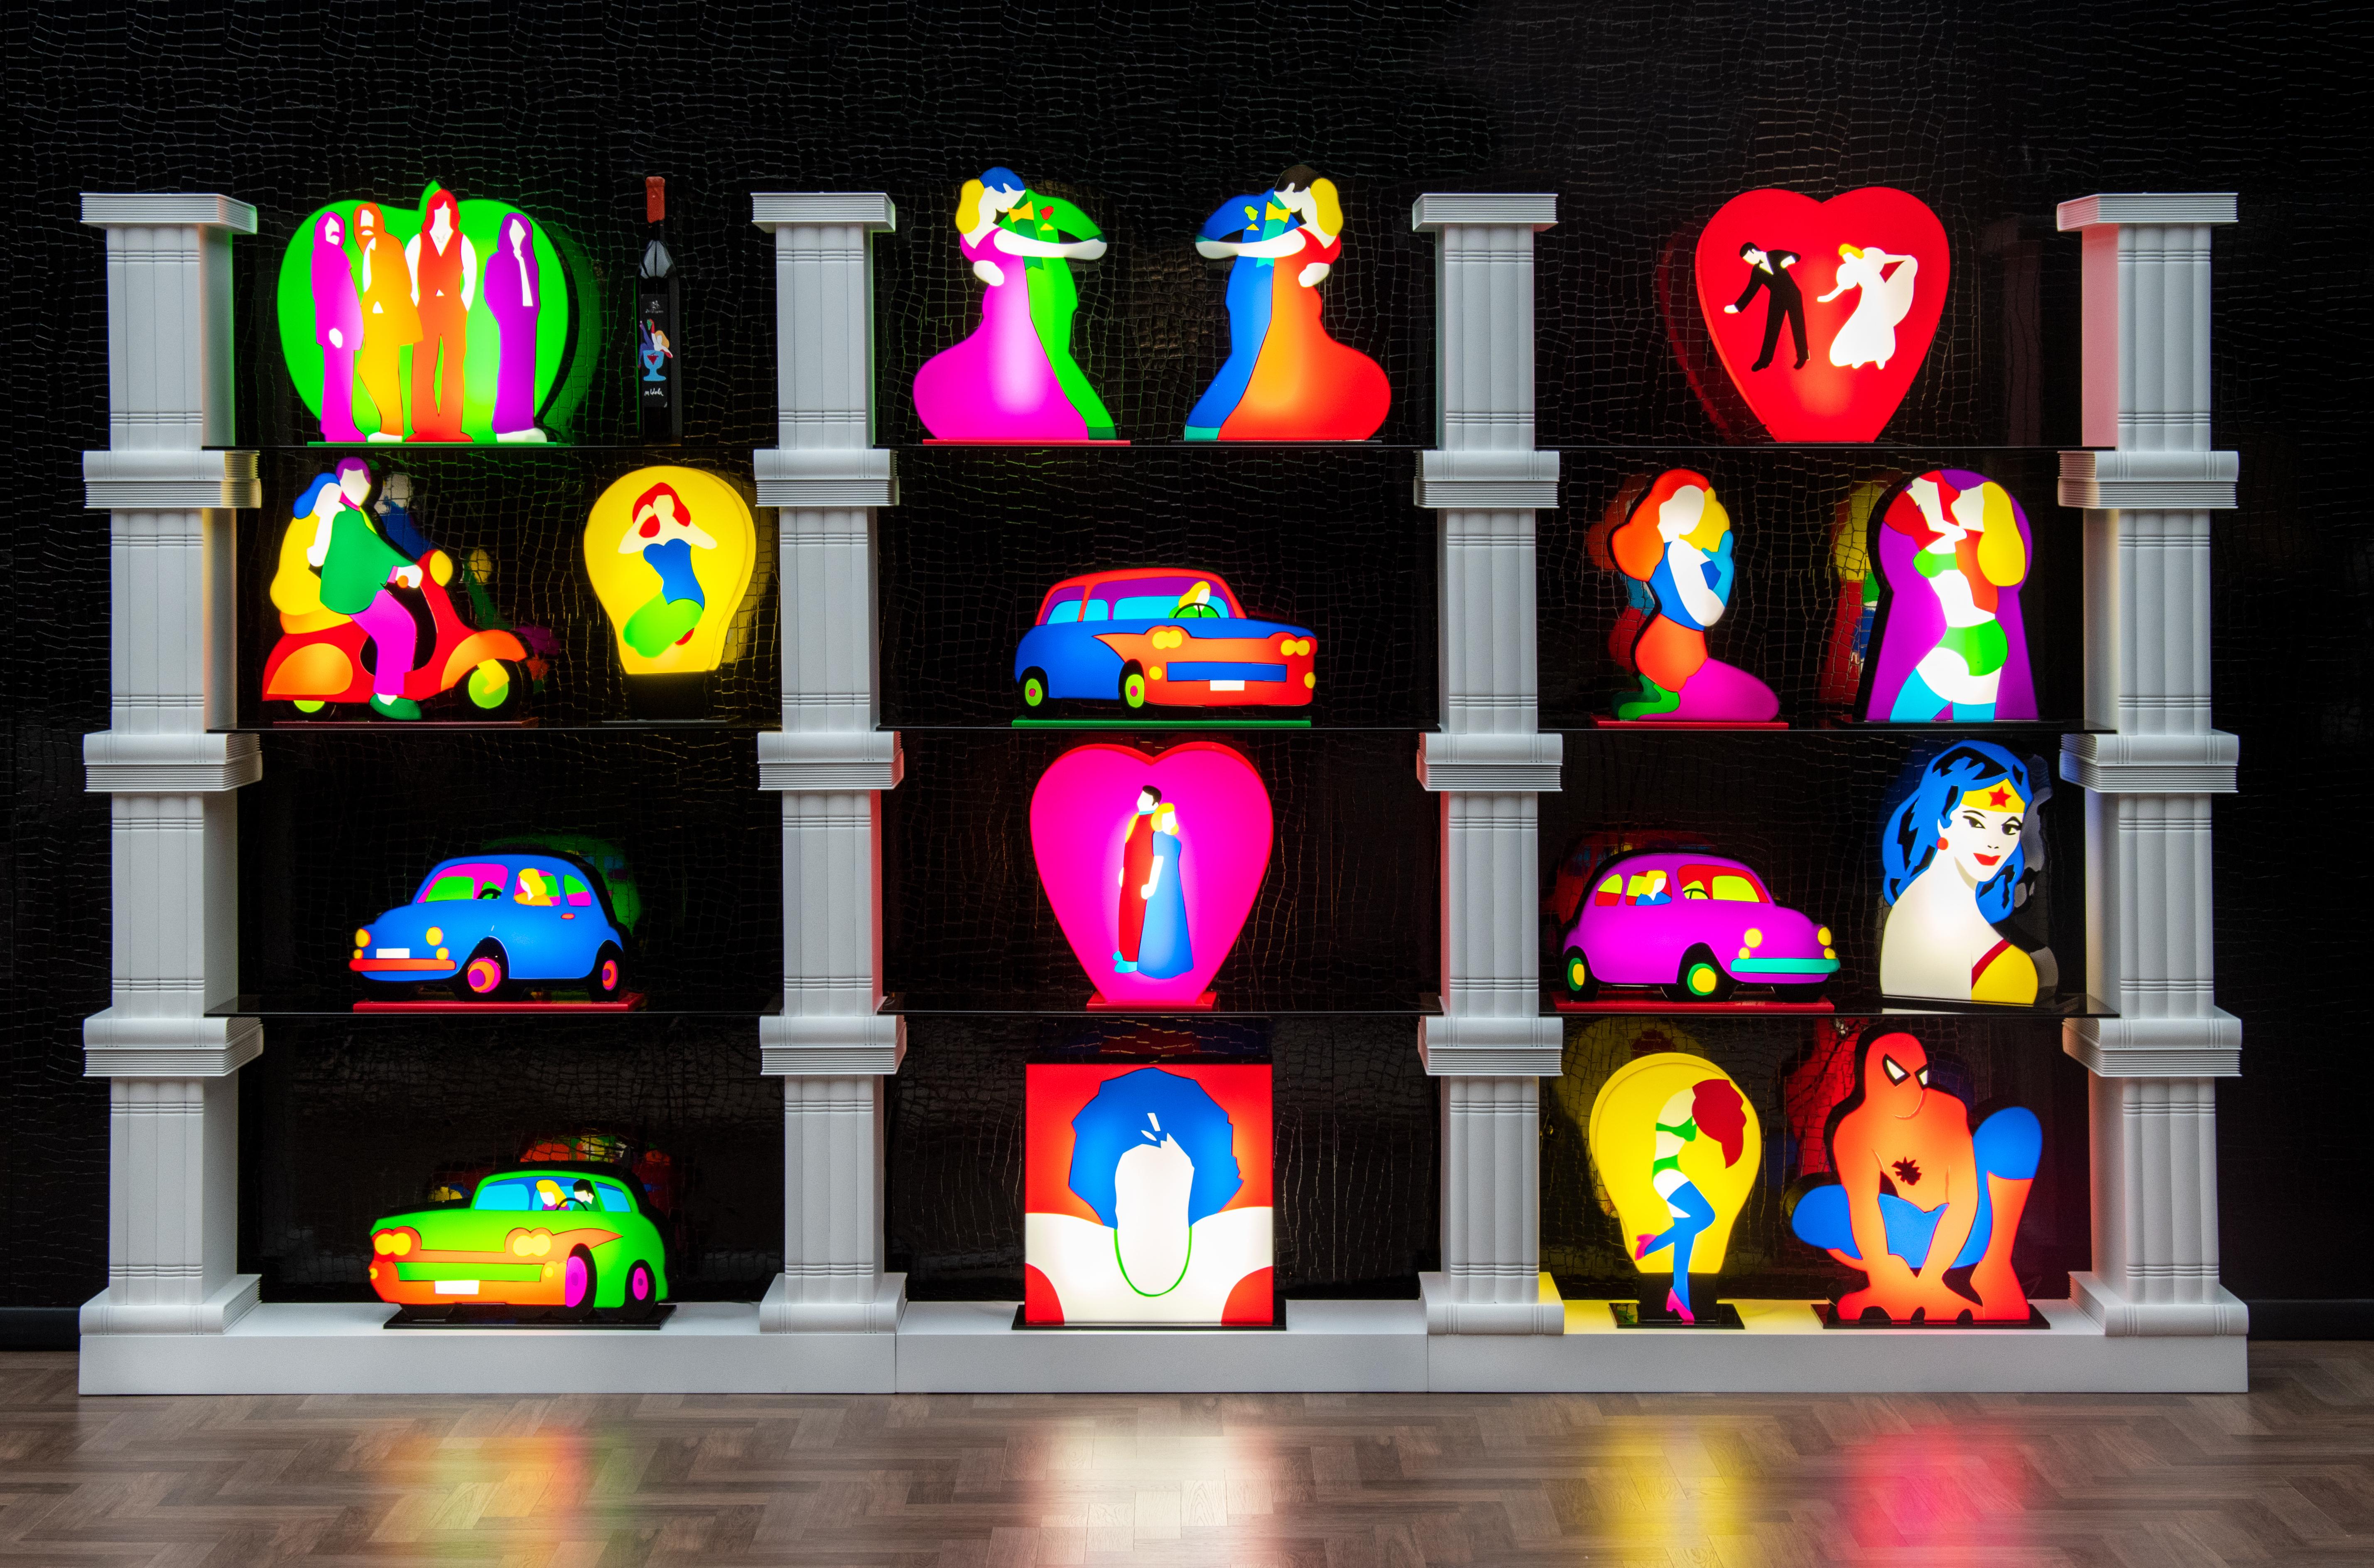 Light sculpture
Made of perpex, neon and hand-applied films
